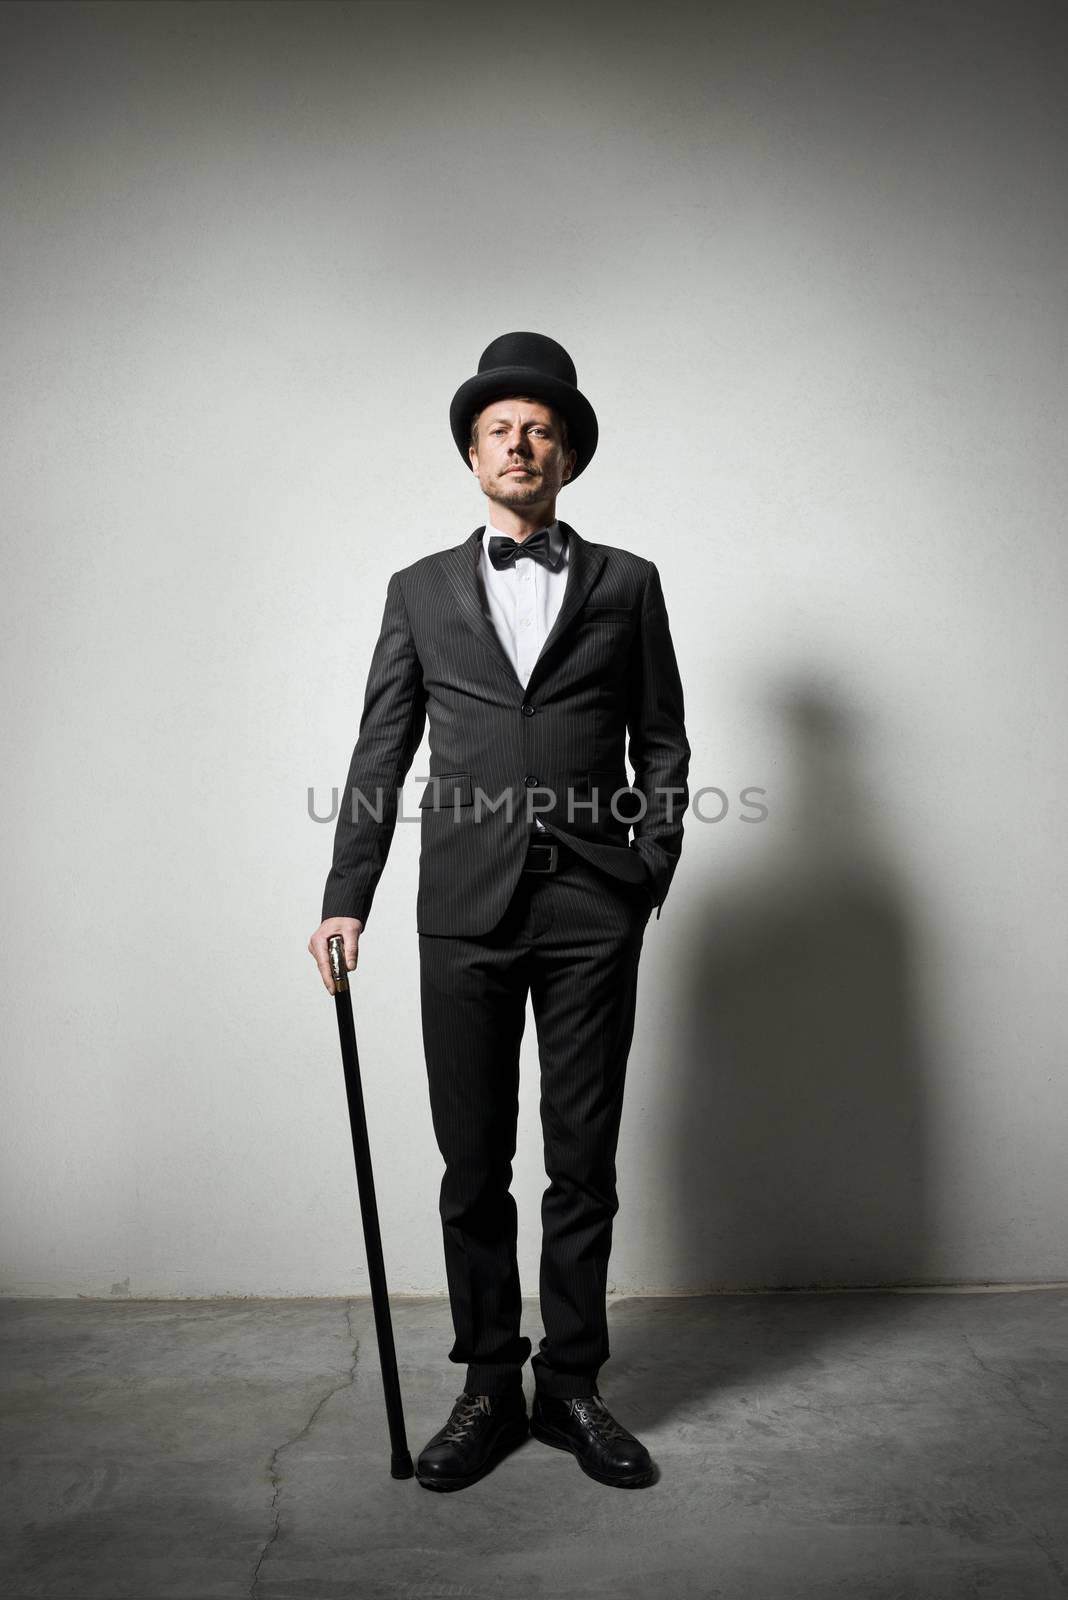 Classy gentleman with bowler hat and cane looking confidently at camera.